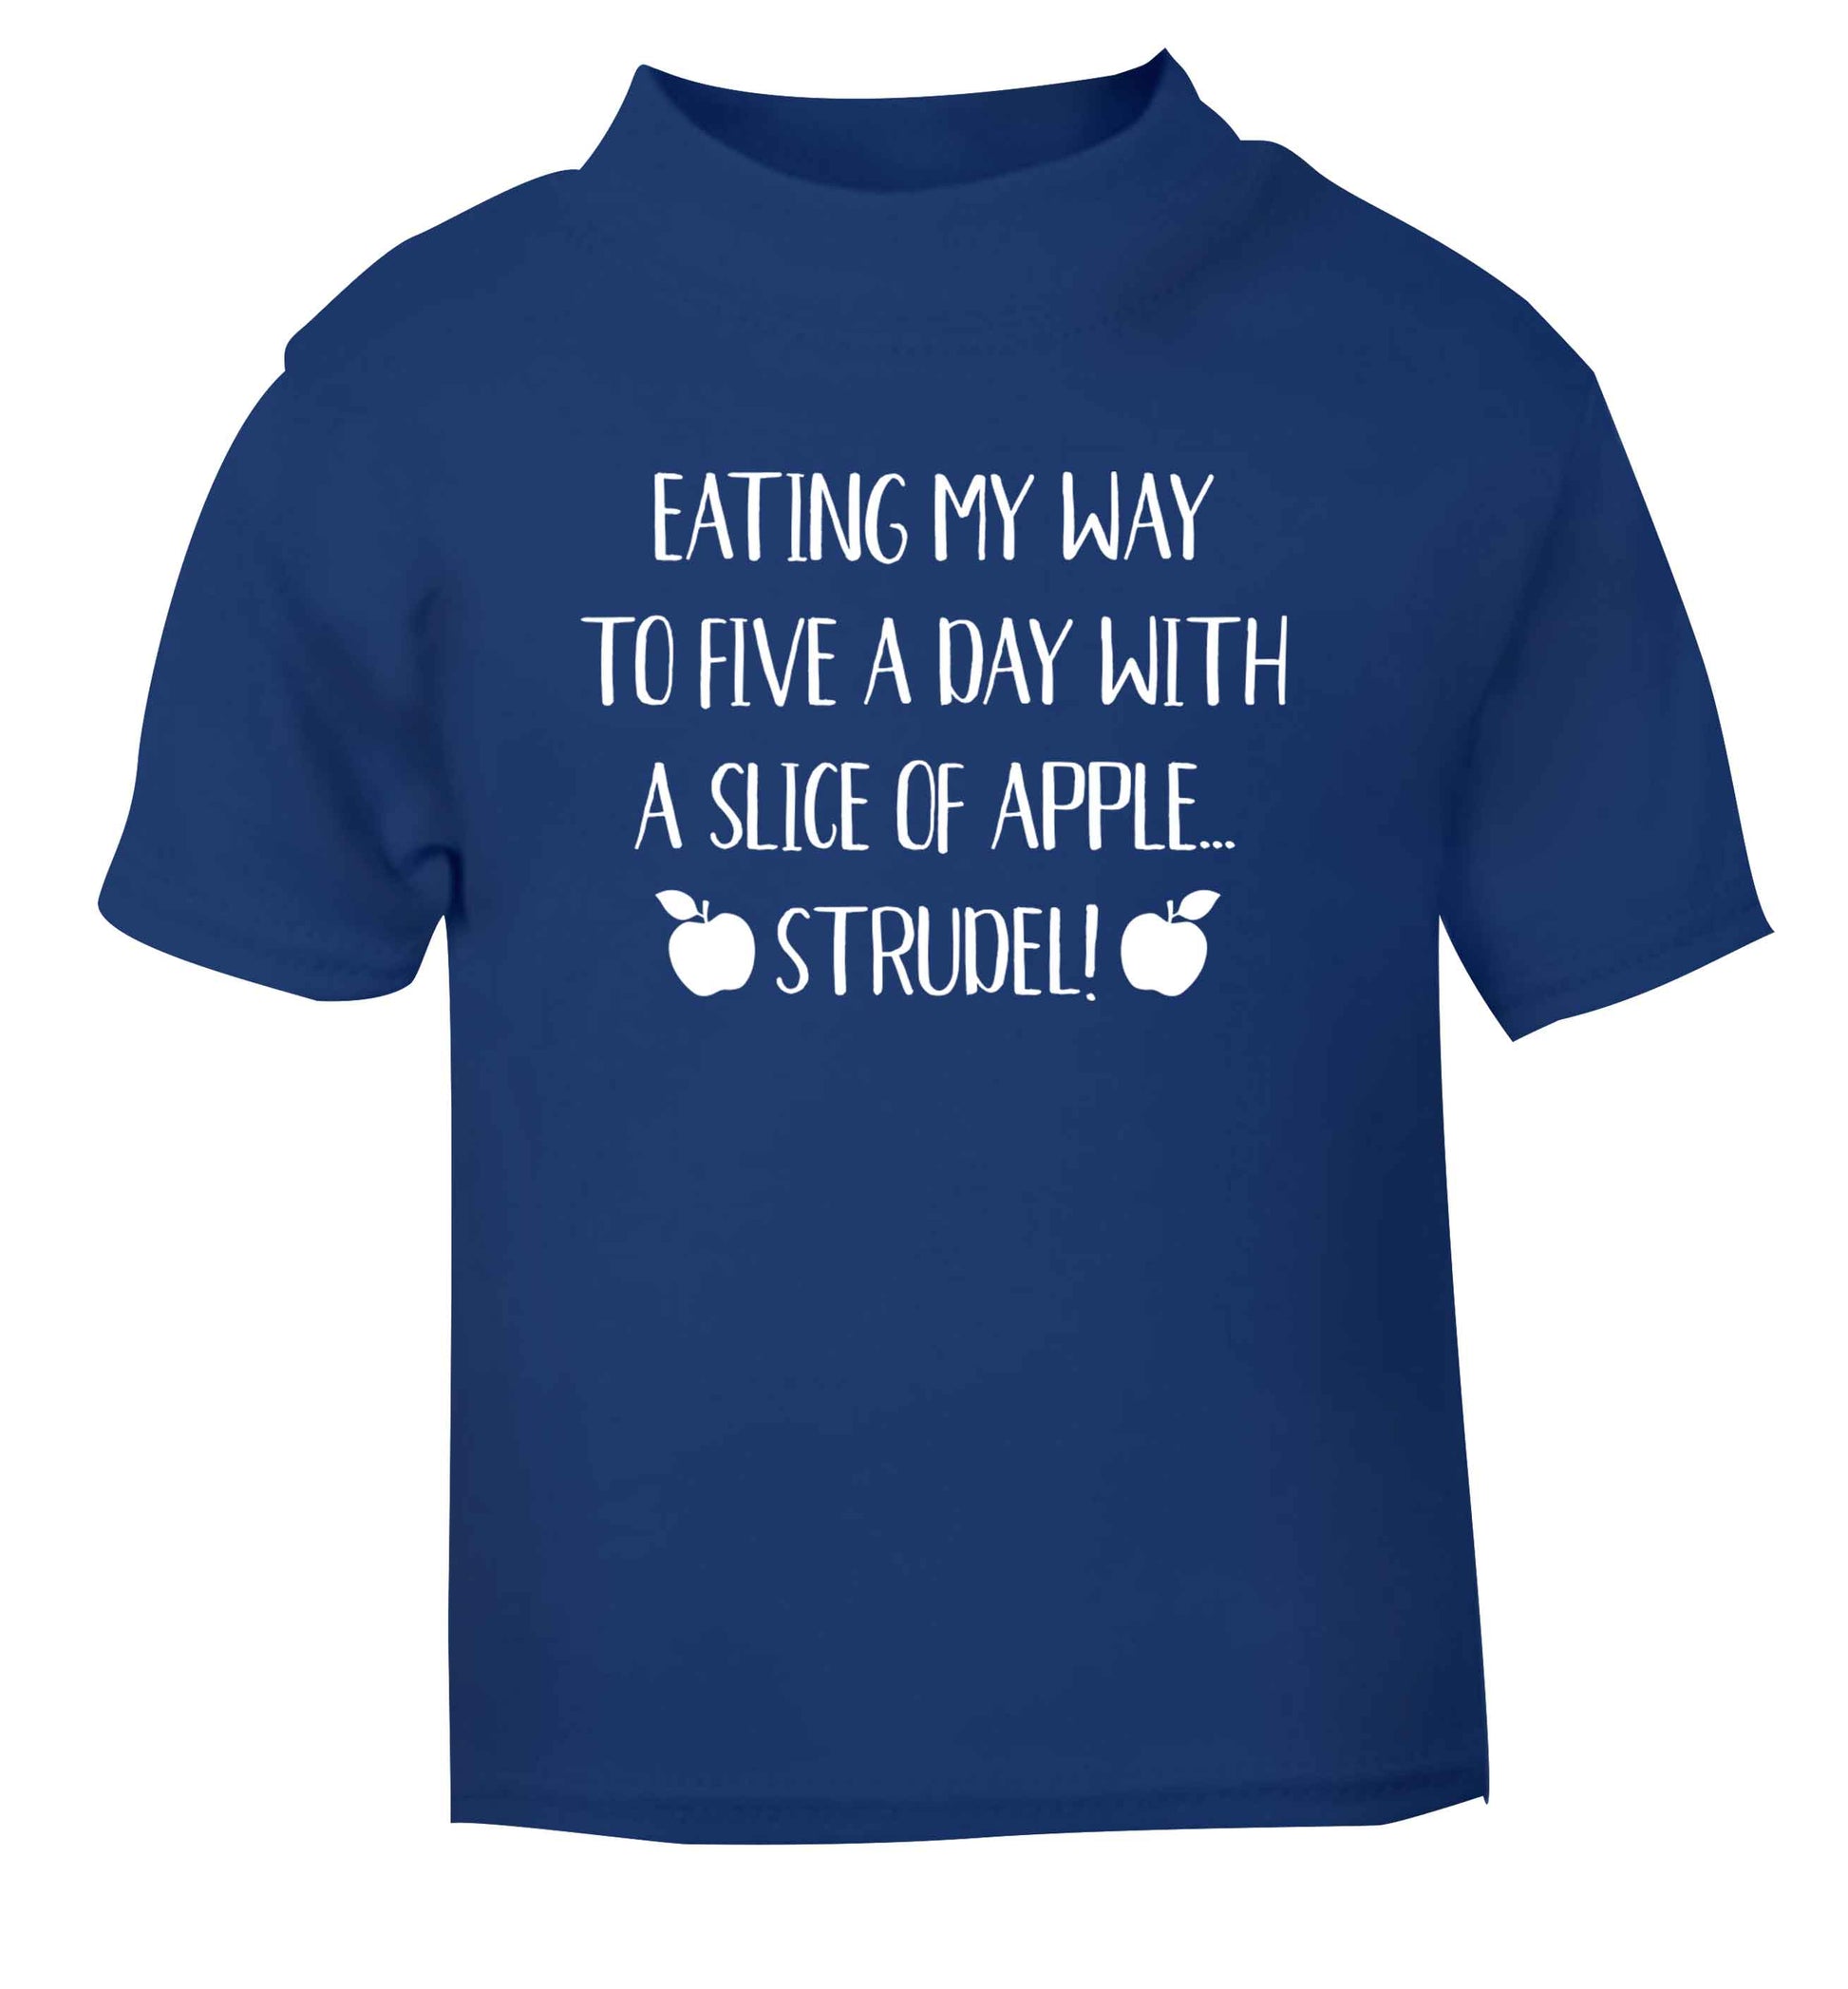 Eating my way to five a day with a slice of apple strudel blue Baby Toddler Tshirt 2 Years